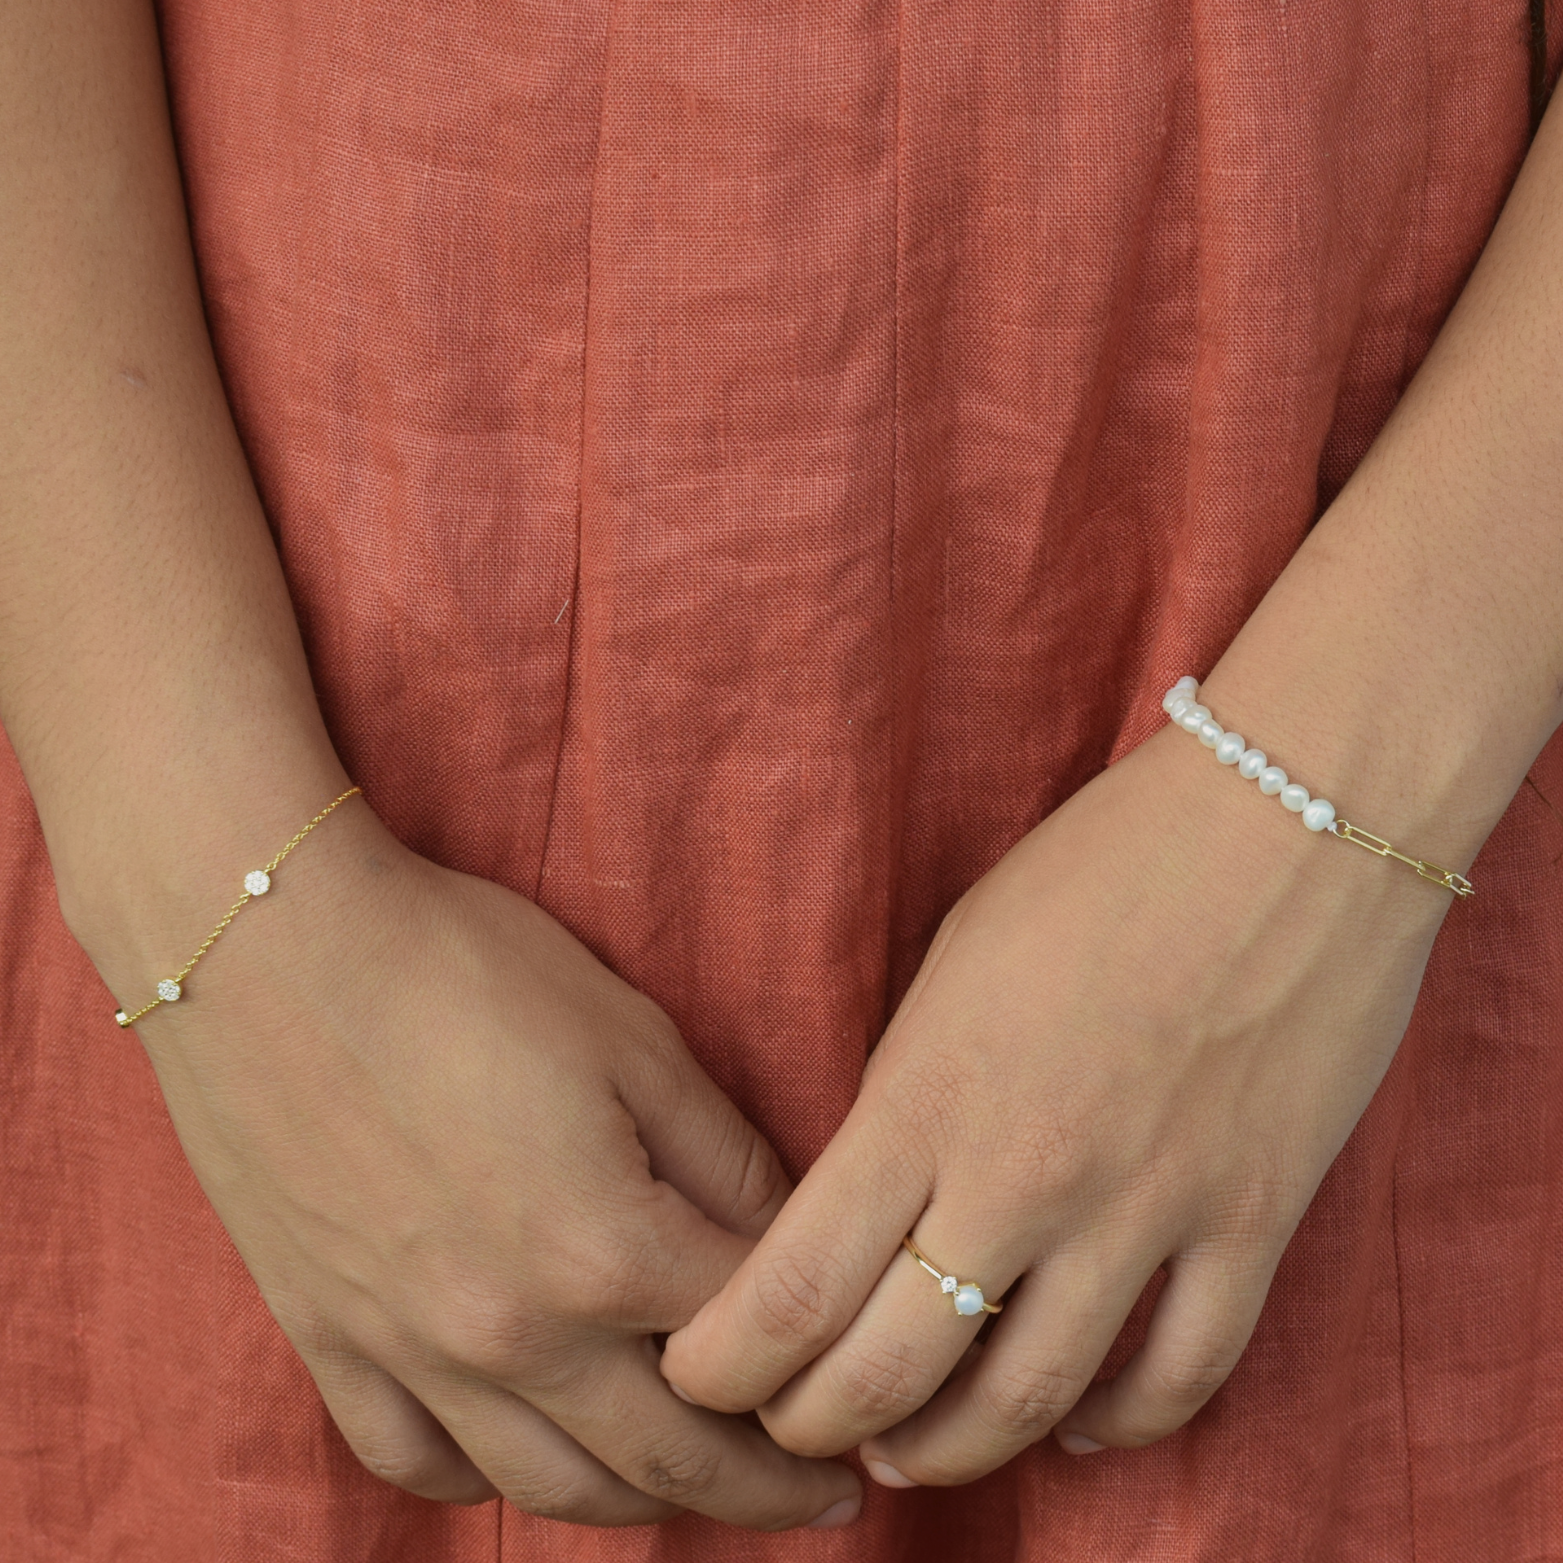 Close-up of a woman's wrist adorned with the Vera bracelet in 14K gold plating